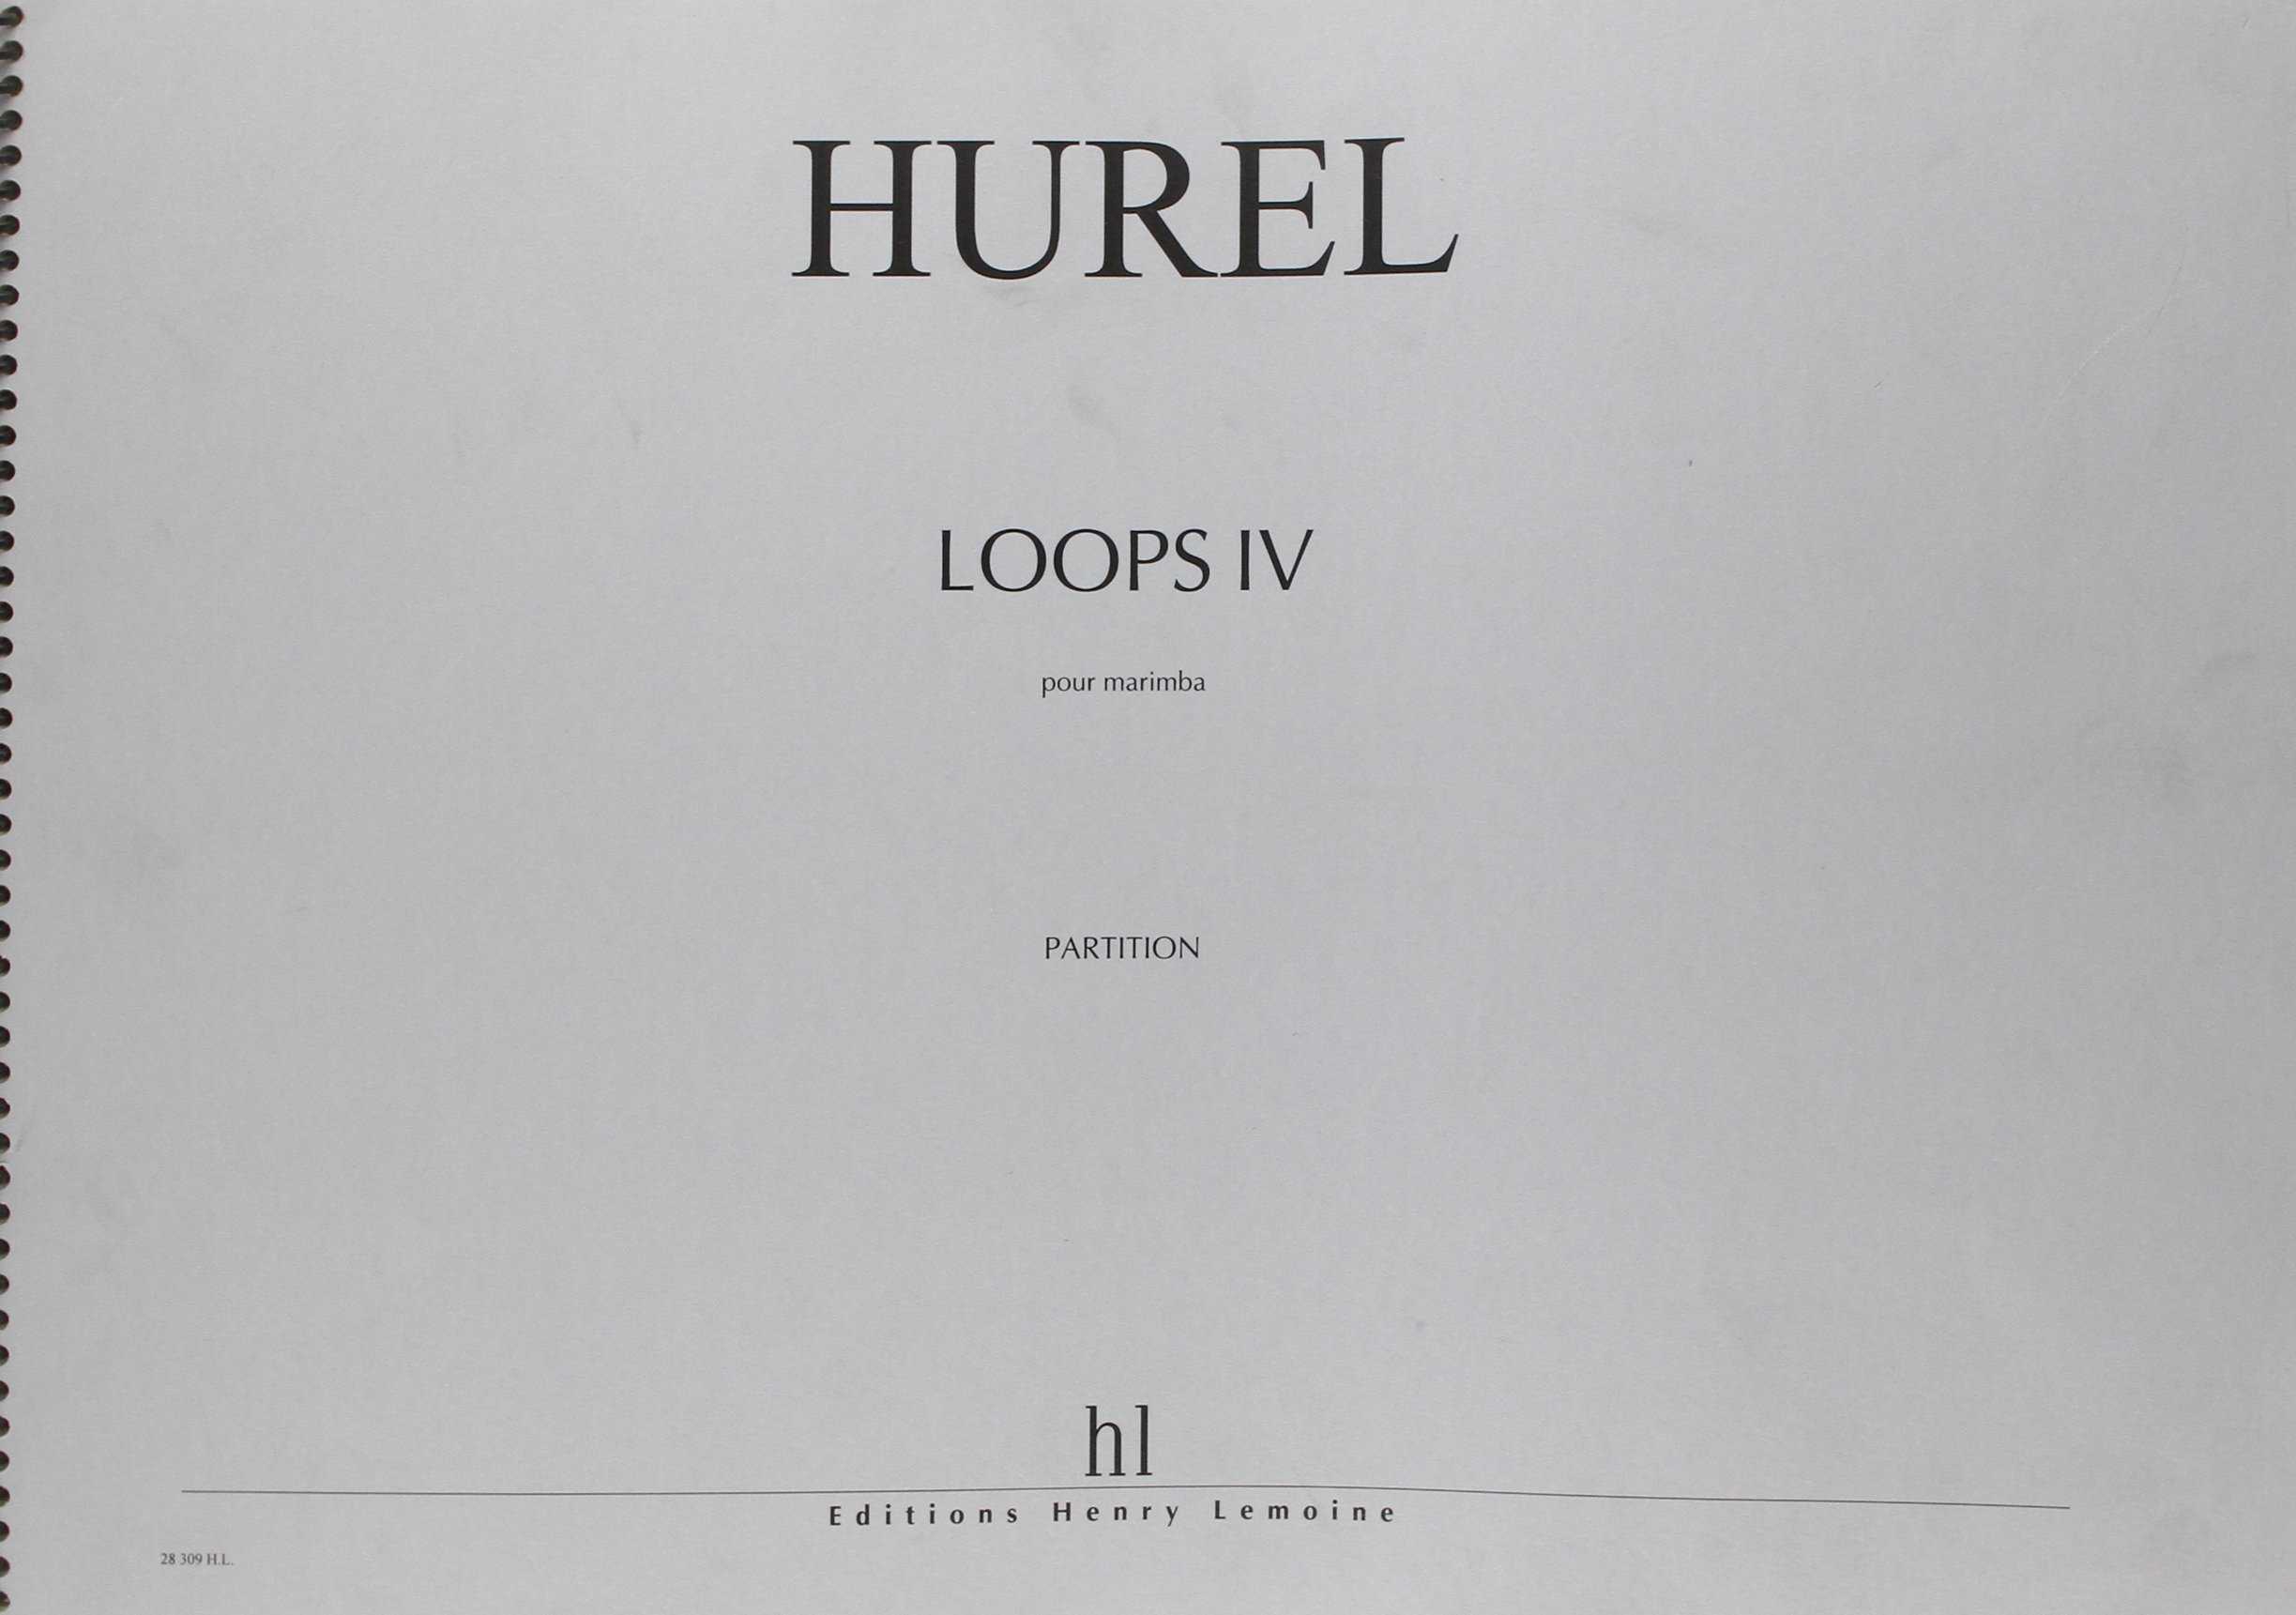 Loops IV by Philippe Hurel